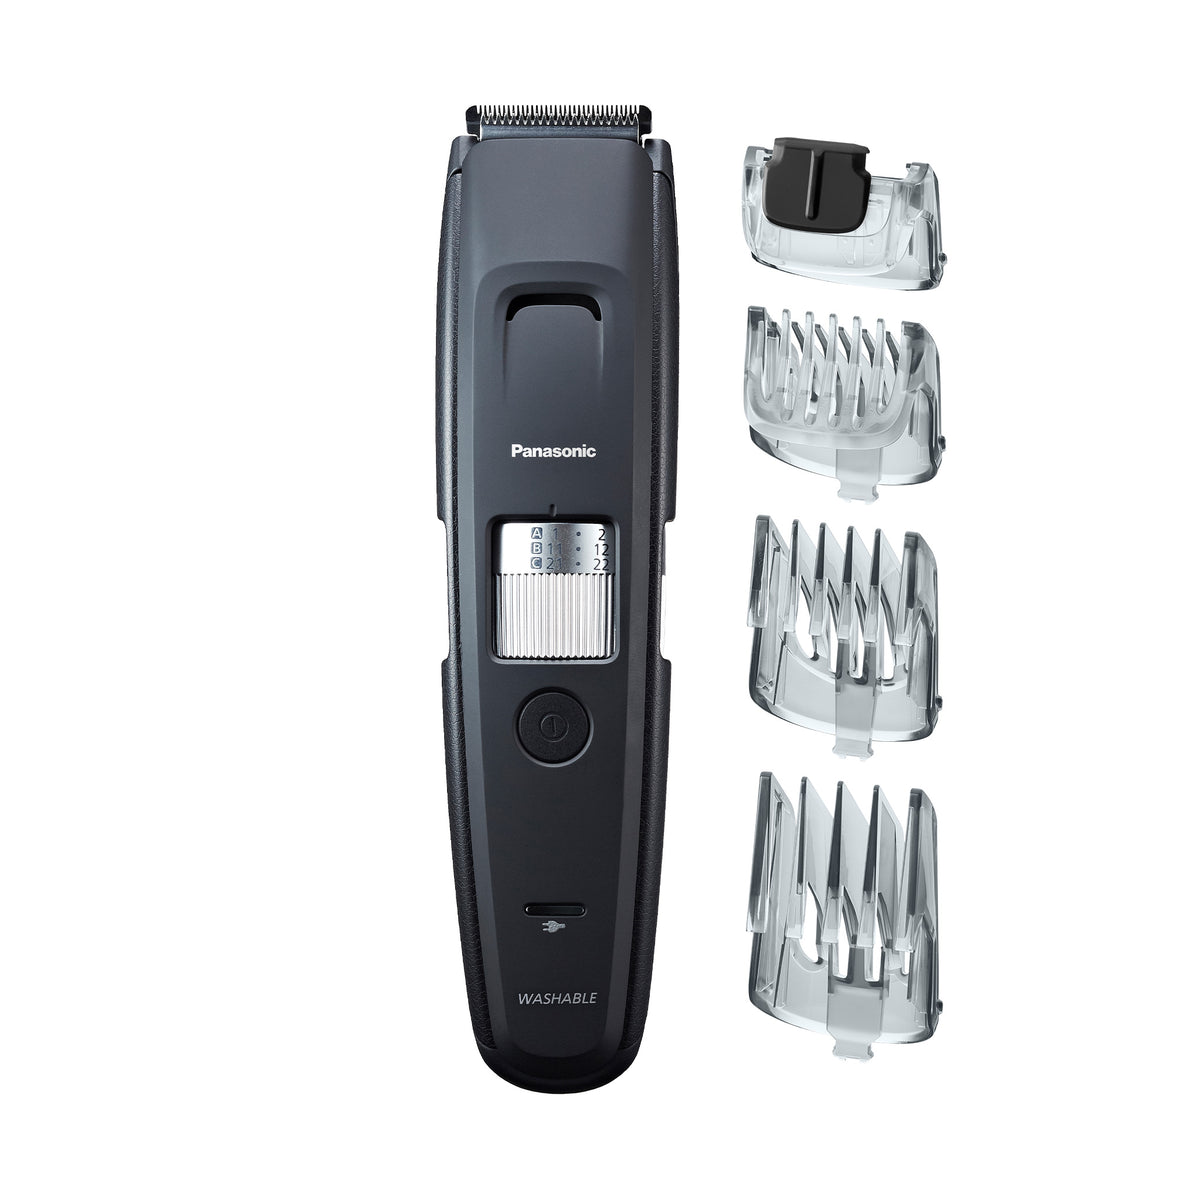 Panasonic Long Beard Hair Trimmer and - Length 4 58 Attachments with ER-GB96-K Comb Adjustable Settings